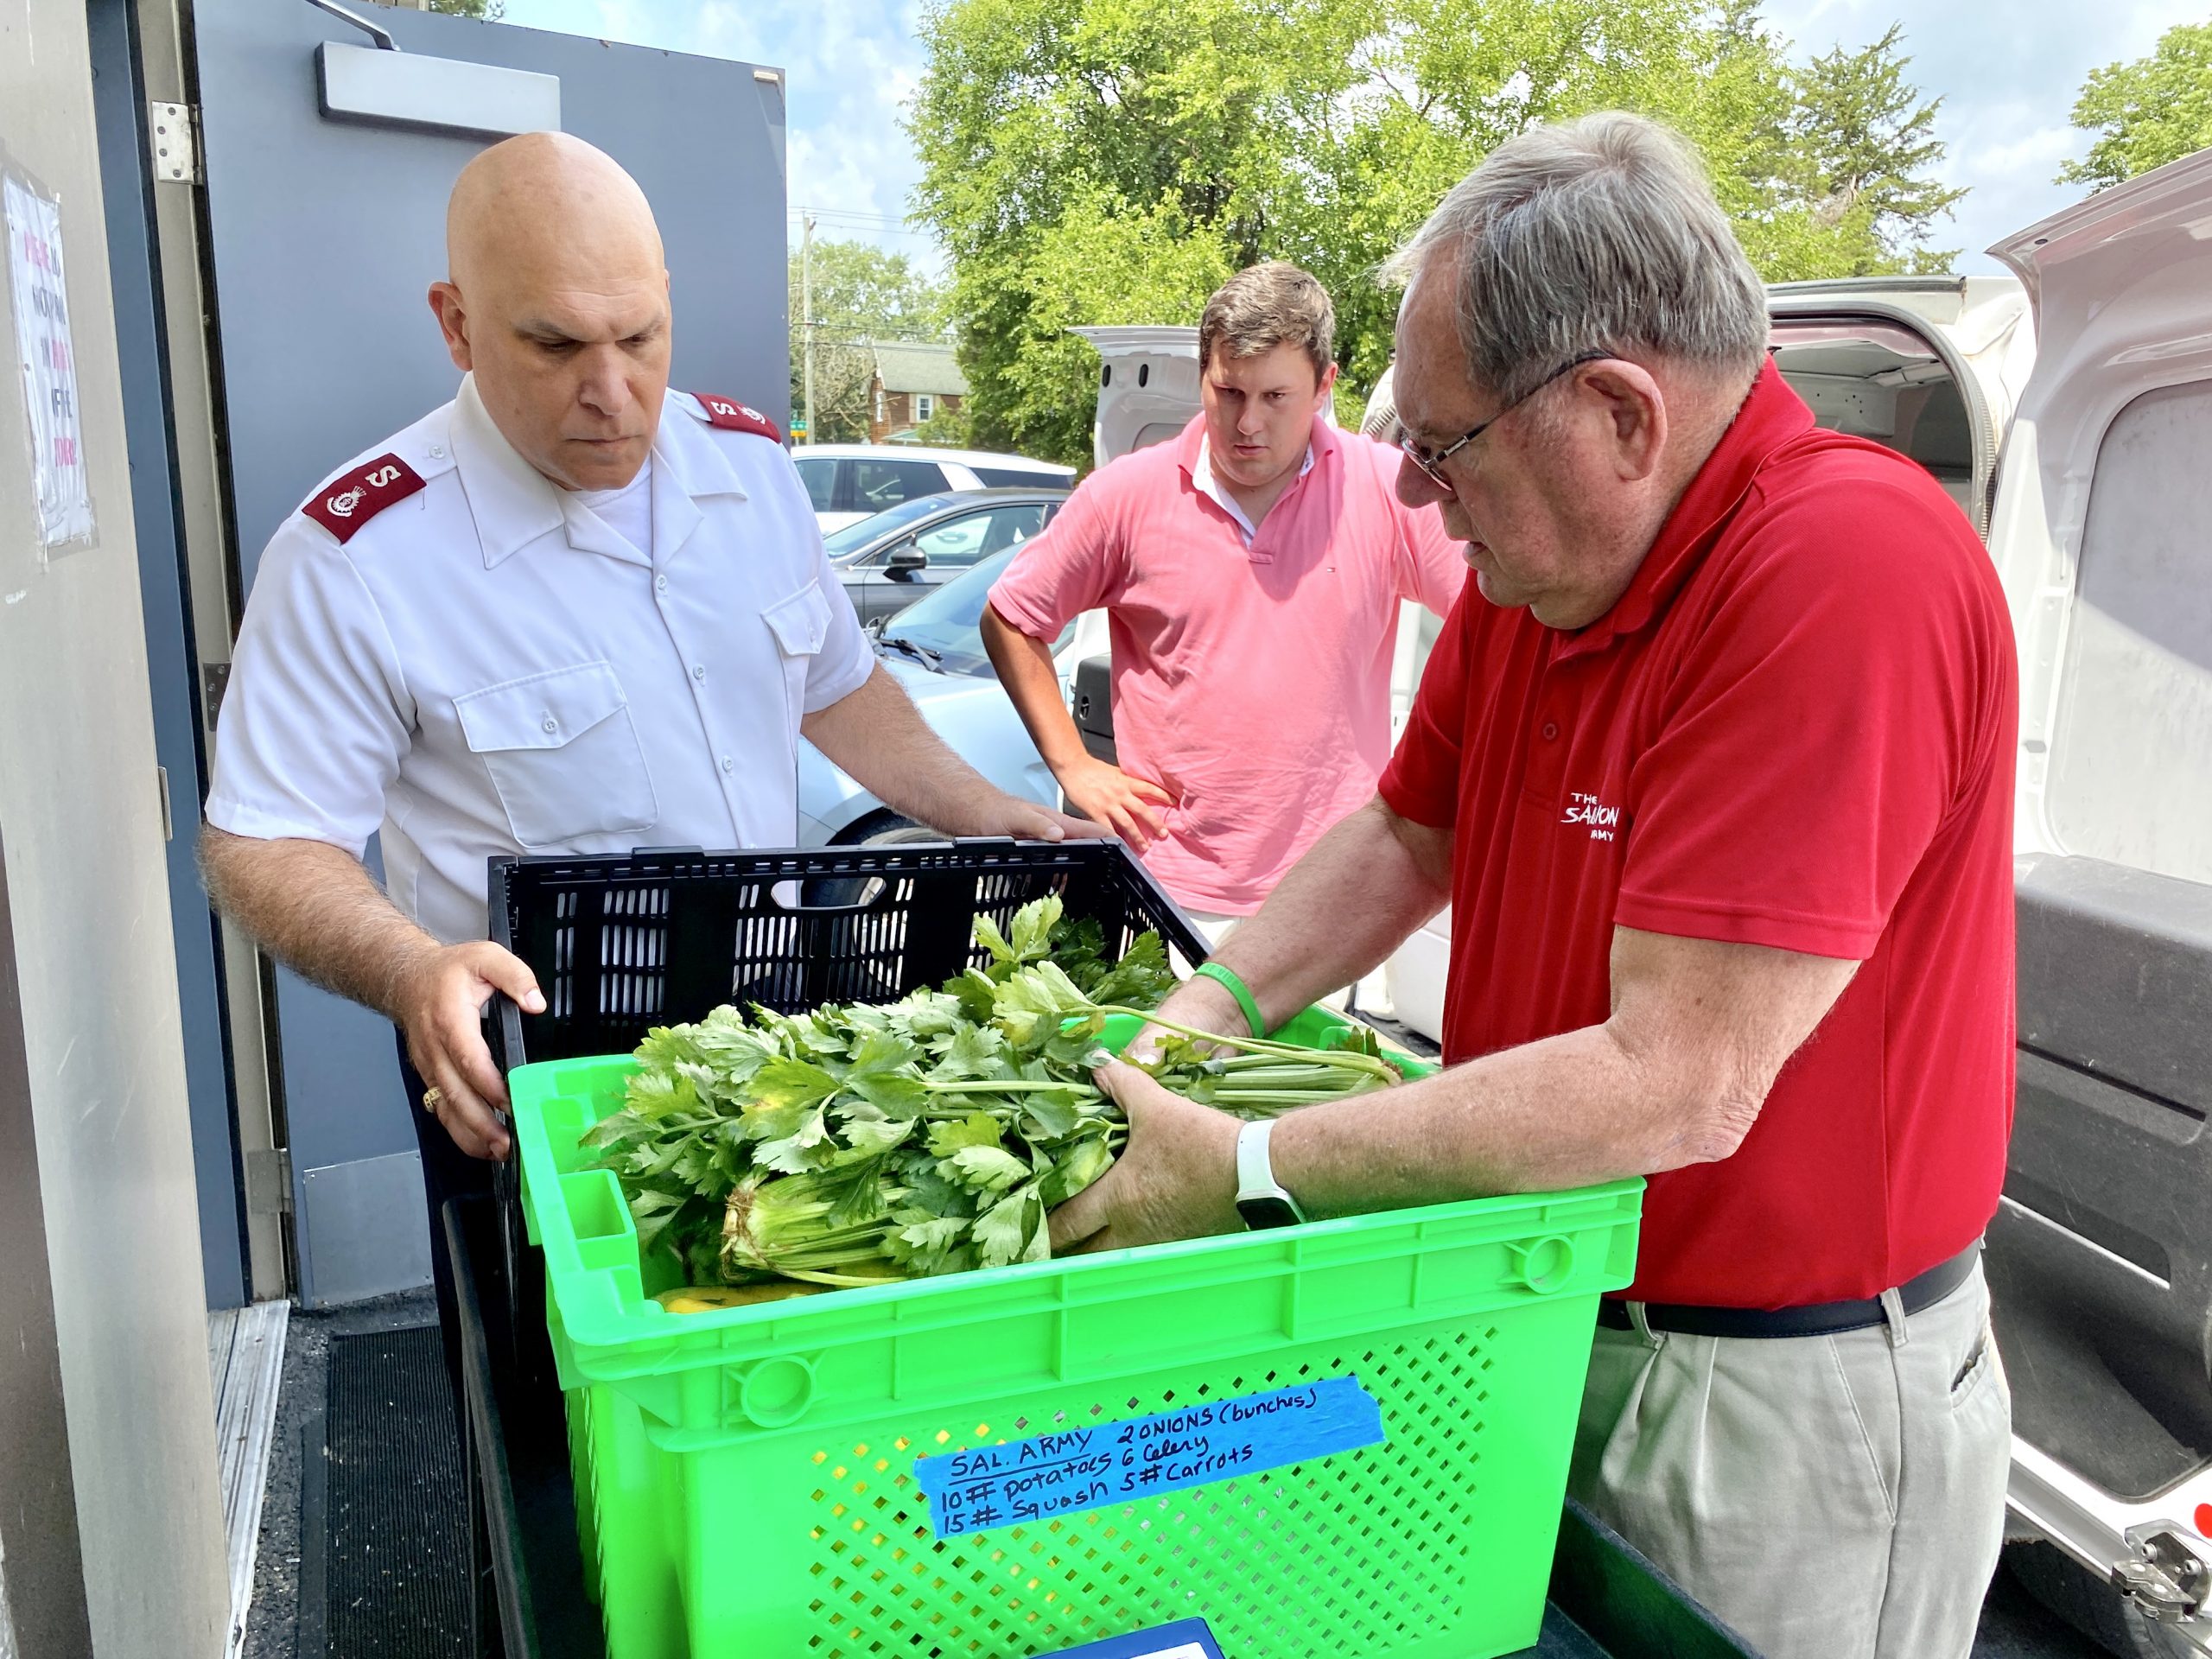 Historic Lewes Farmers Market volunteers deliver a bin of Delaware Grown produce to the Salvation Army as part of their Strengthening the Farm to Pantry Food System in Sussex County.